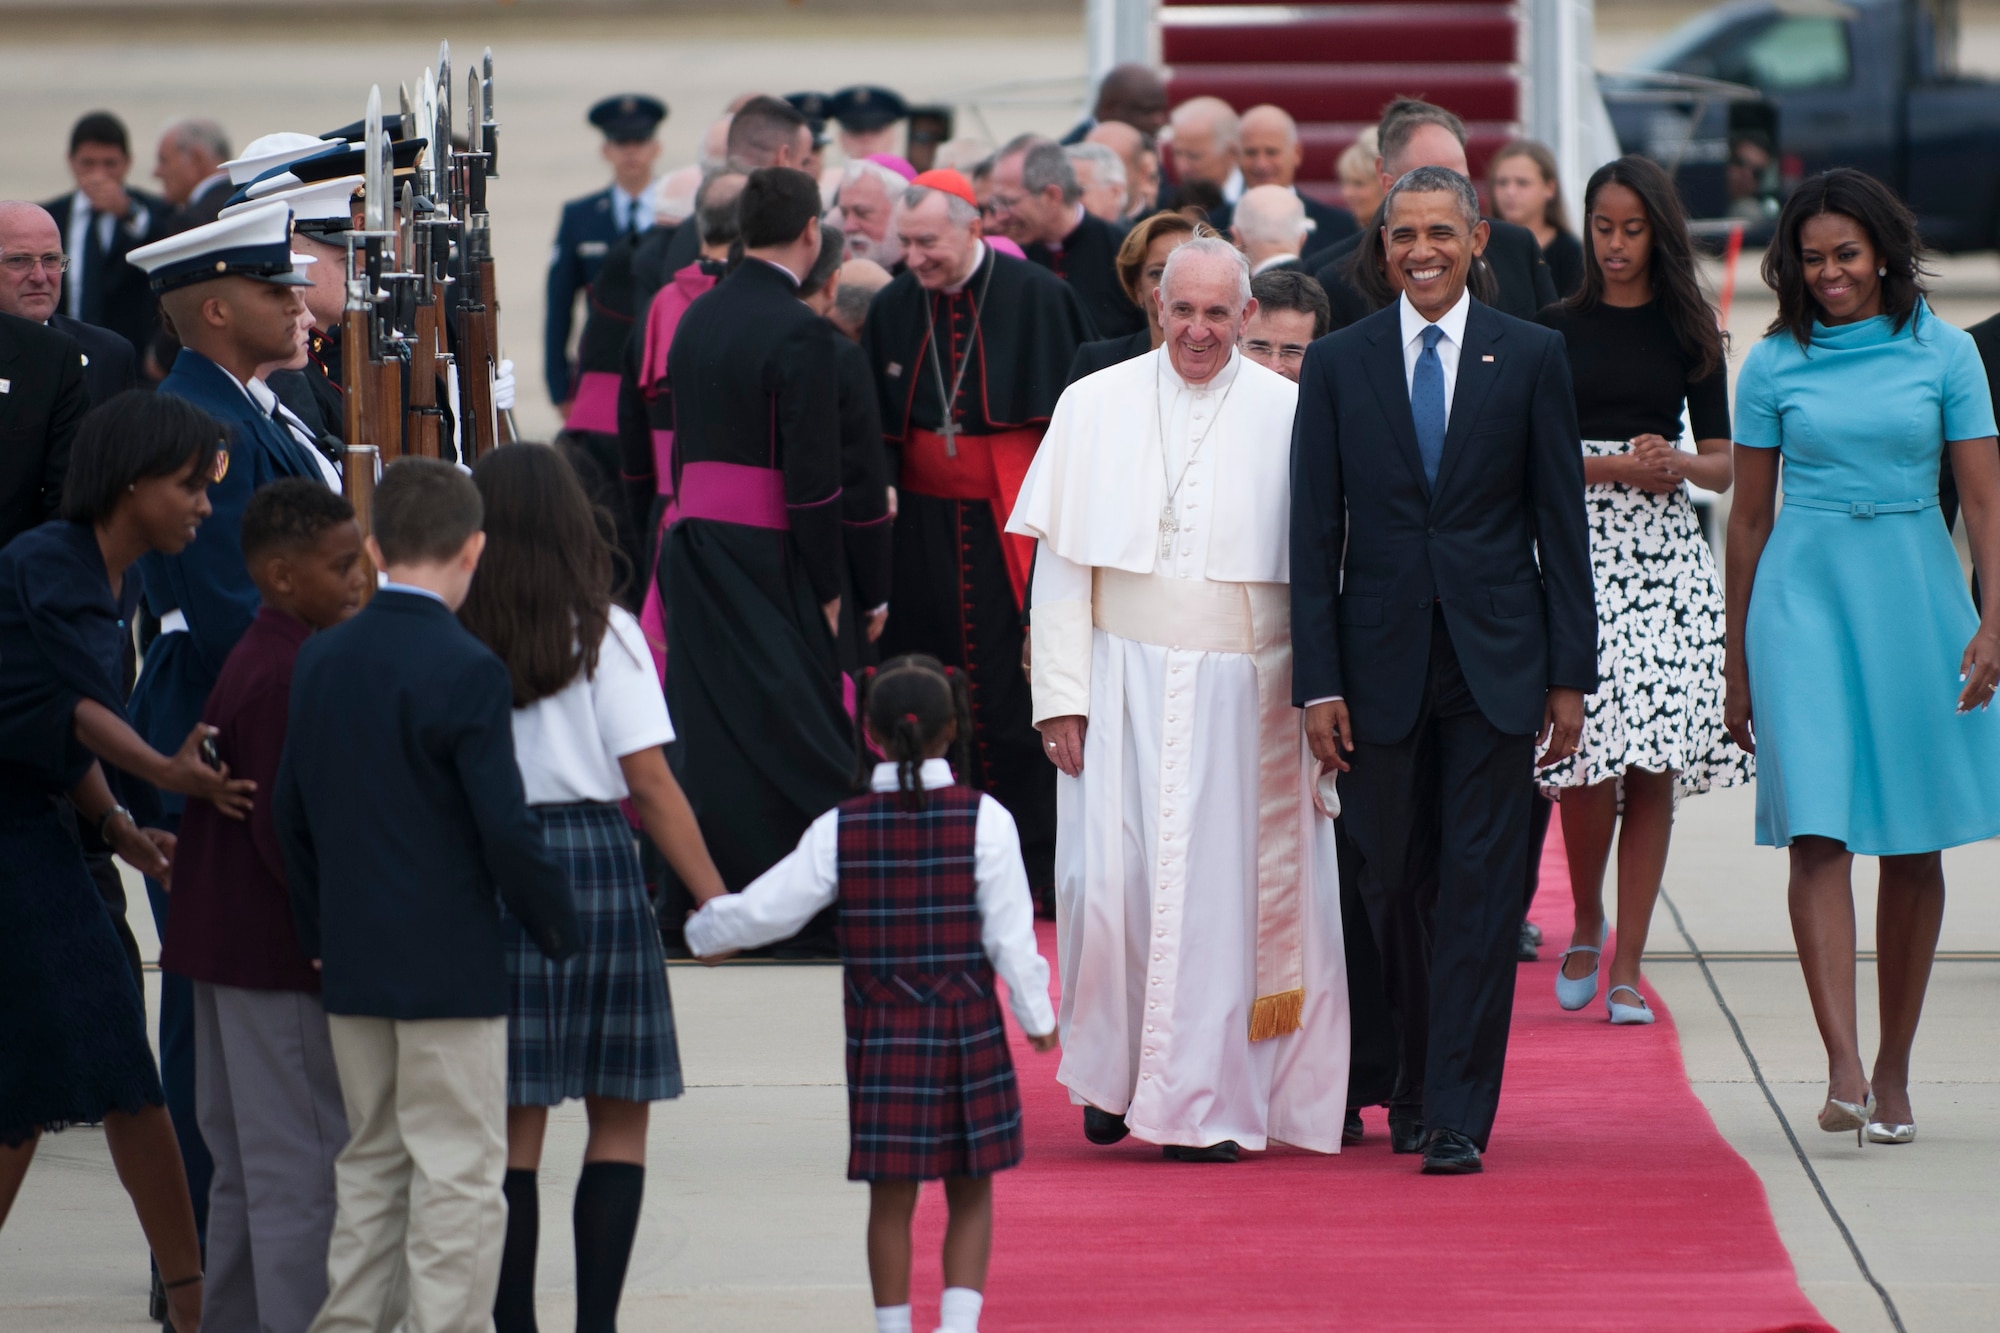 Pope Francis and President Barack Obama are greeted by catholic school children on the flightline on Joint Base Andrews, Md., Sept. 22, 2015. The children are local to the National Capital Region and presented the pope with a gift of flowers. (U.S. Air Force photo/Airman 1st Class Philip Bryant)